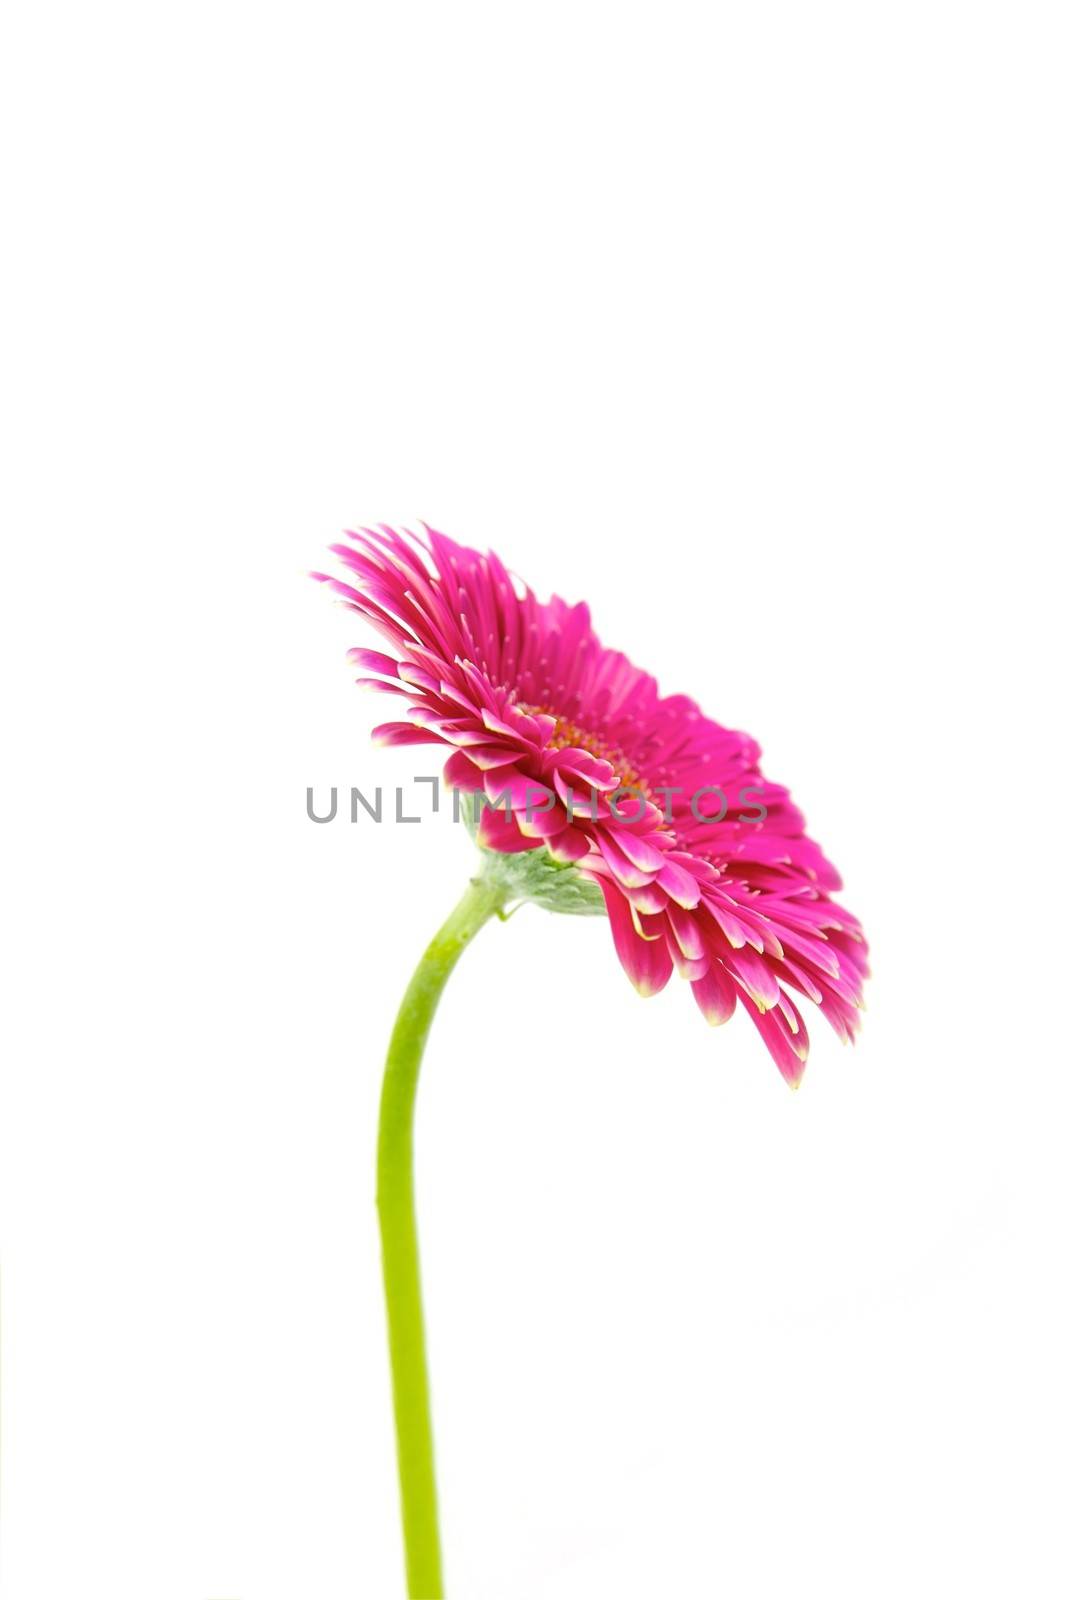 A pink gerbera flower on a white background